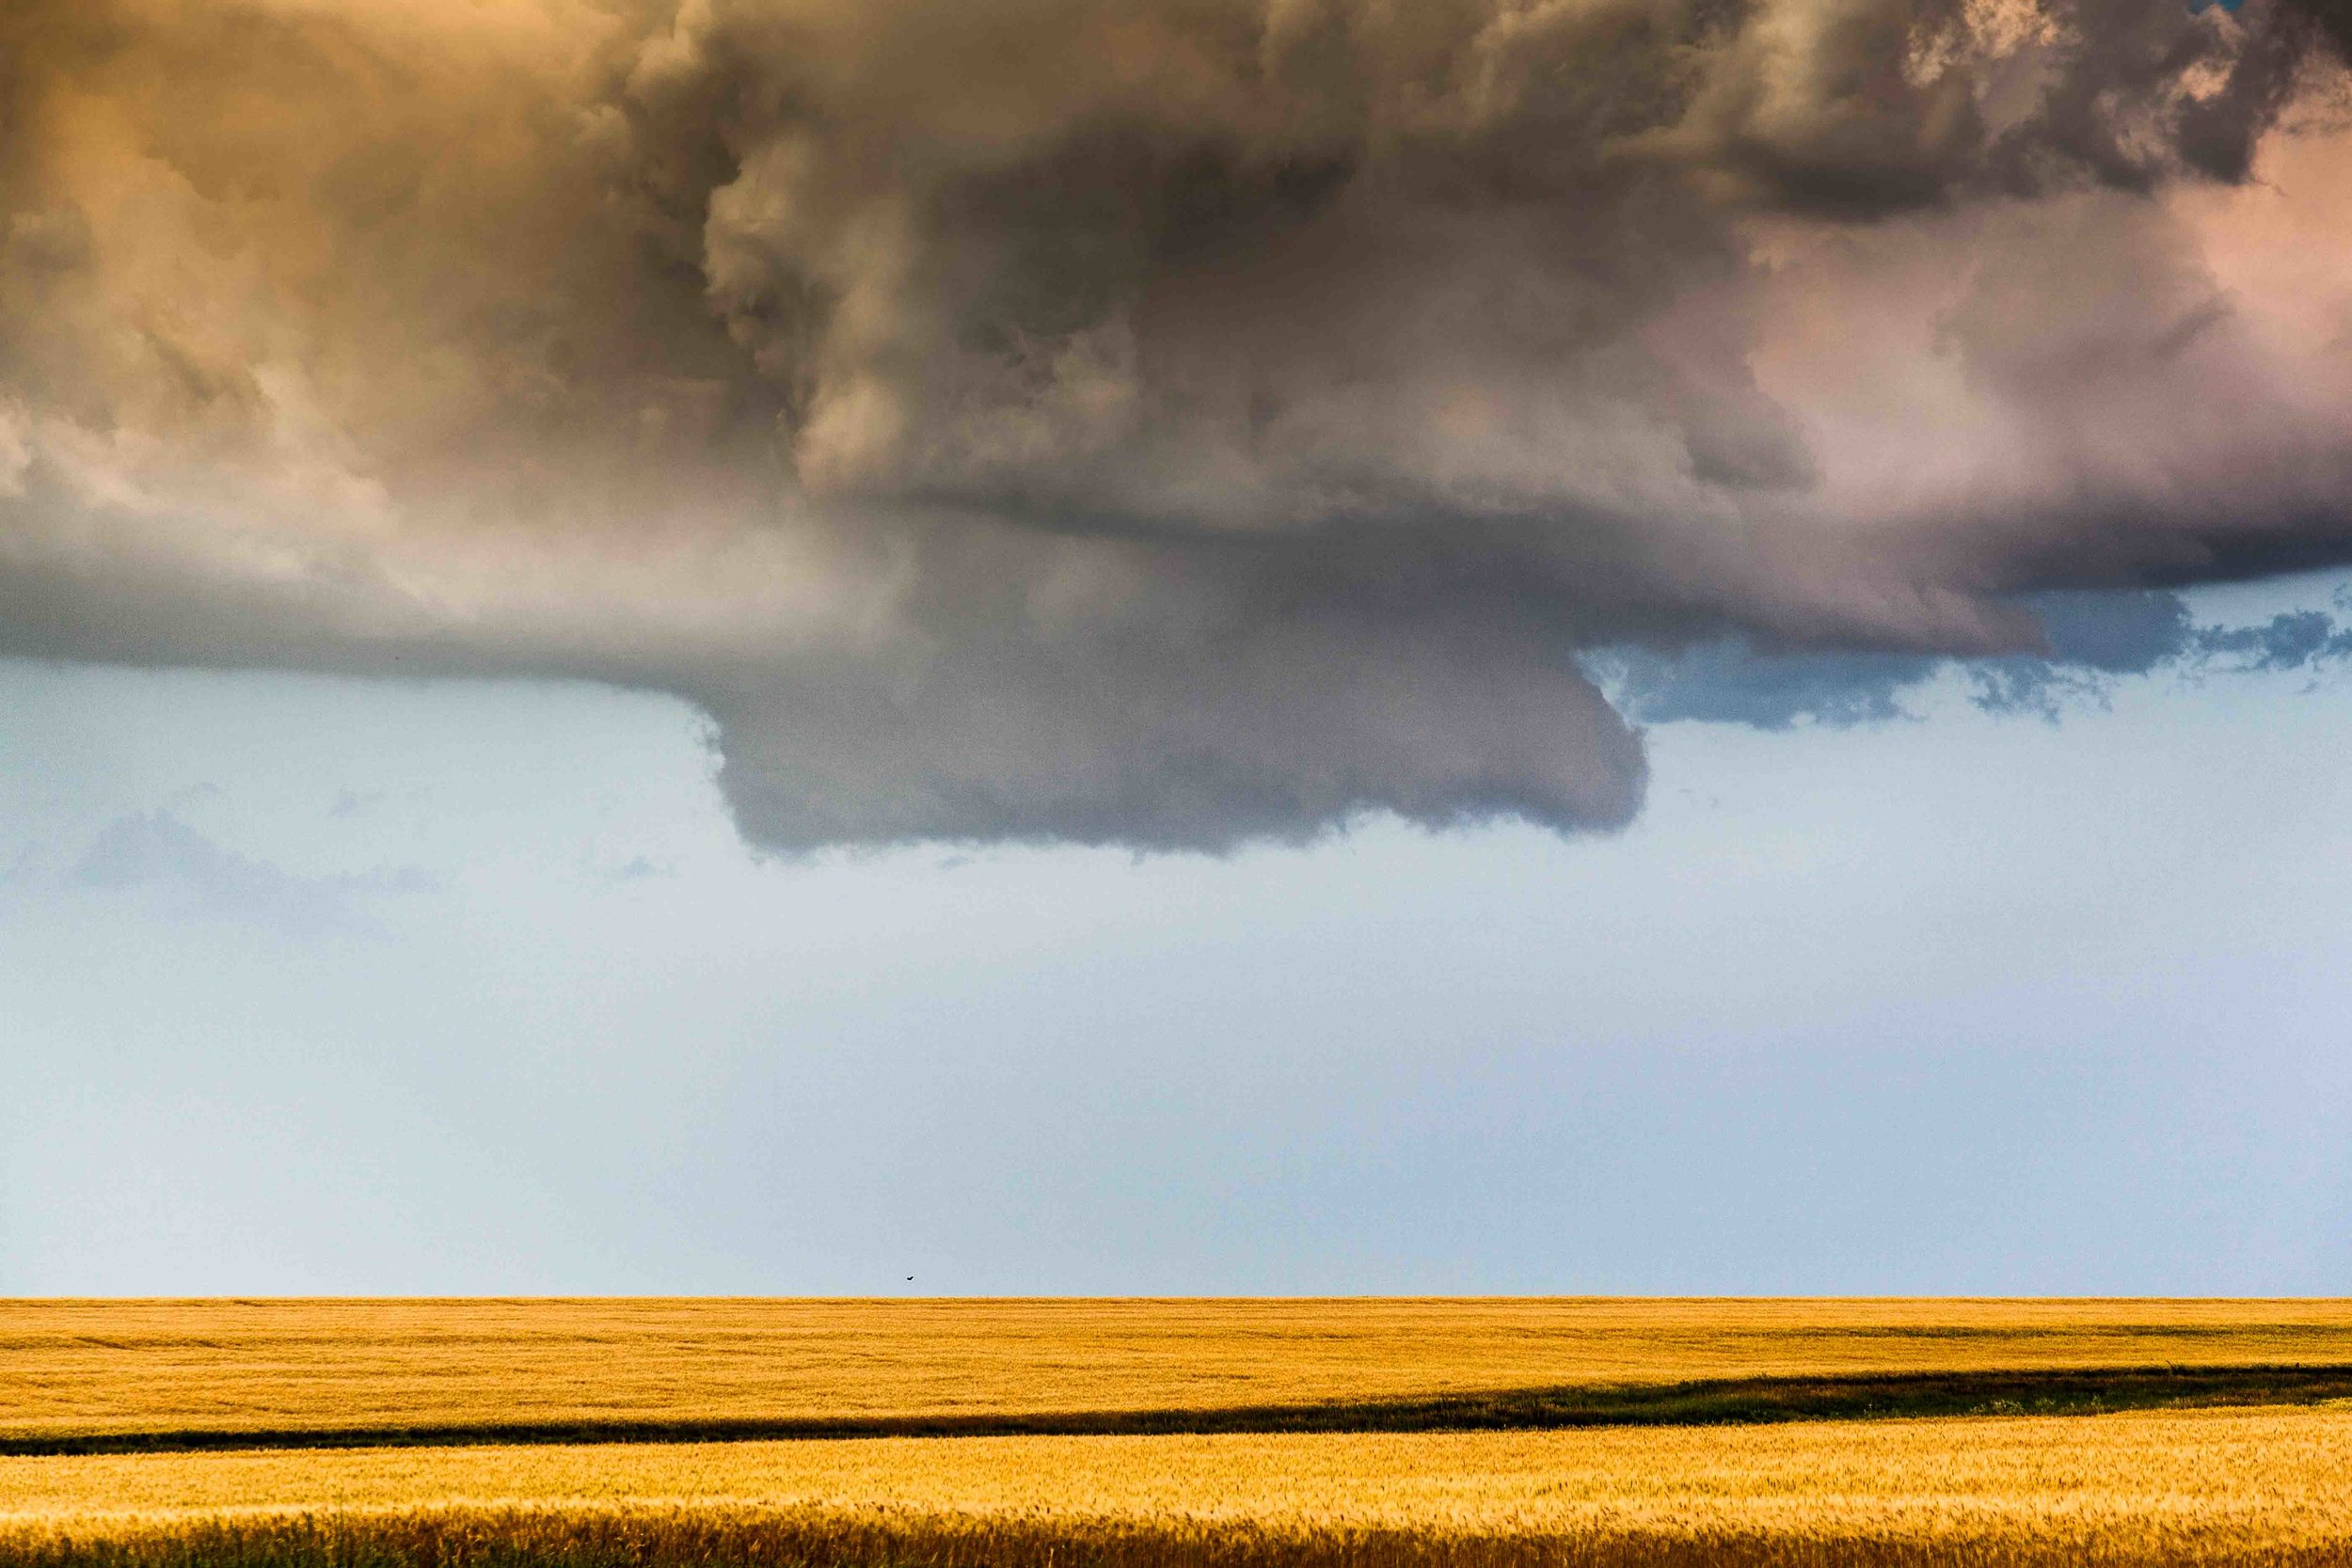 Wheat field with crow, and wall cloud